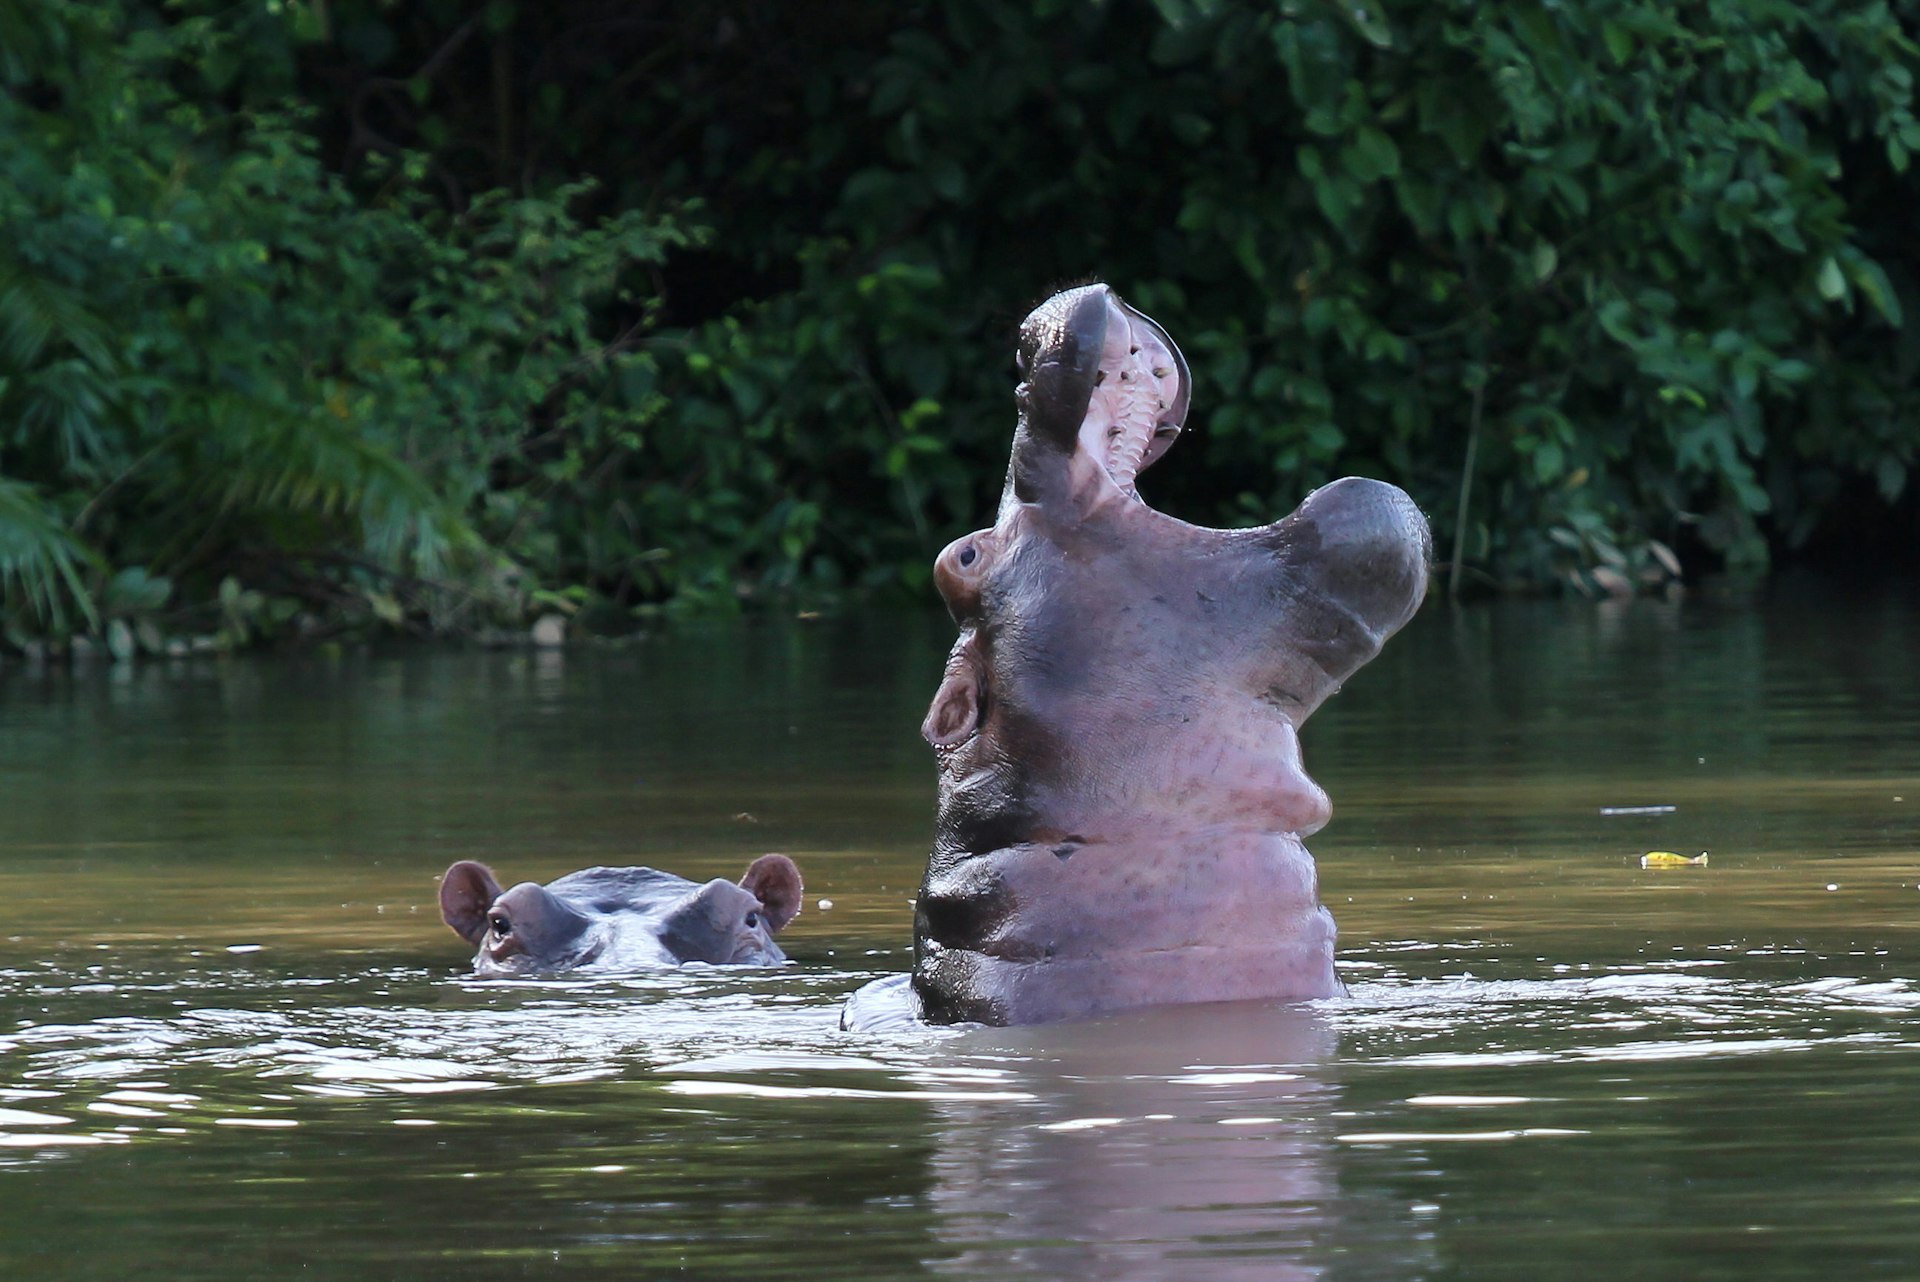 Two hippos in the River Gambia; one is submerged with only its eyes and ears showing, while the other is bursting from the water revealing its entire head, with mouth wide open and teeth visible.